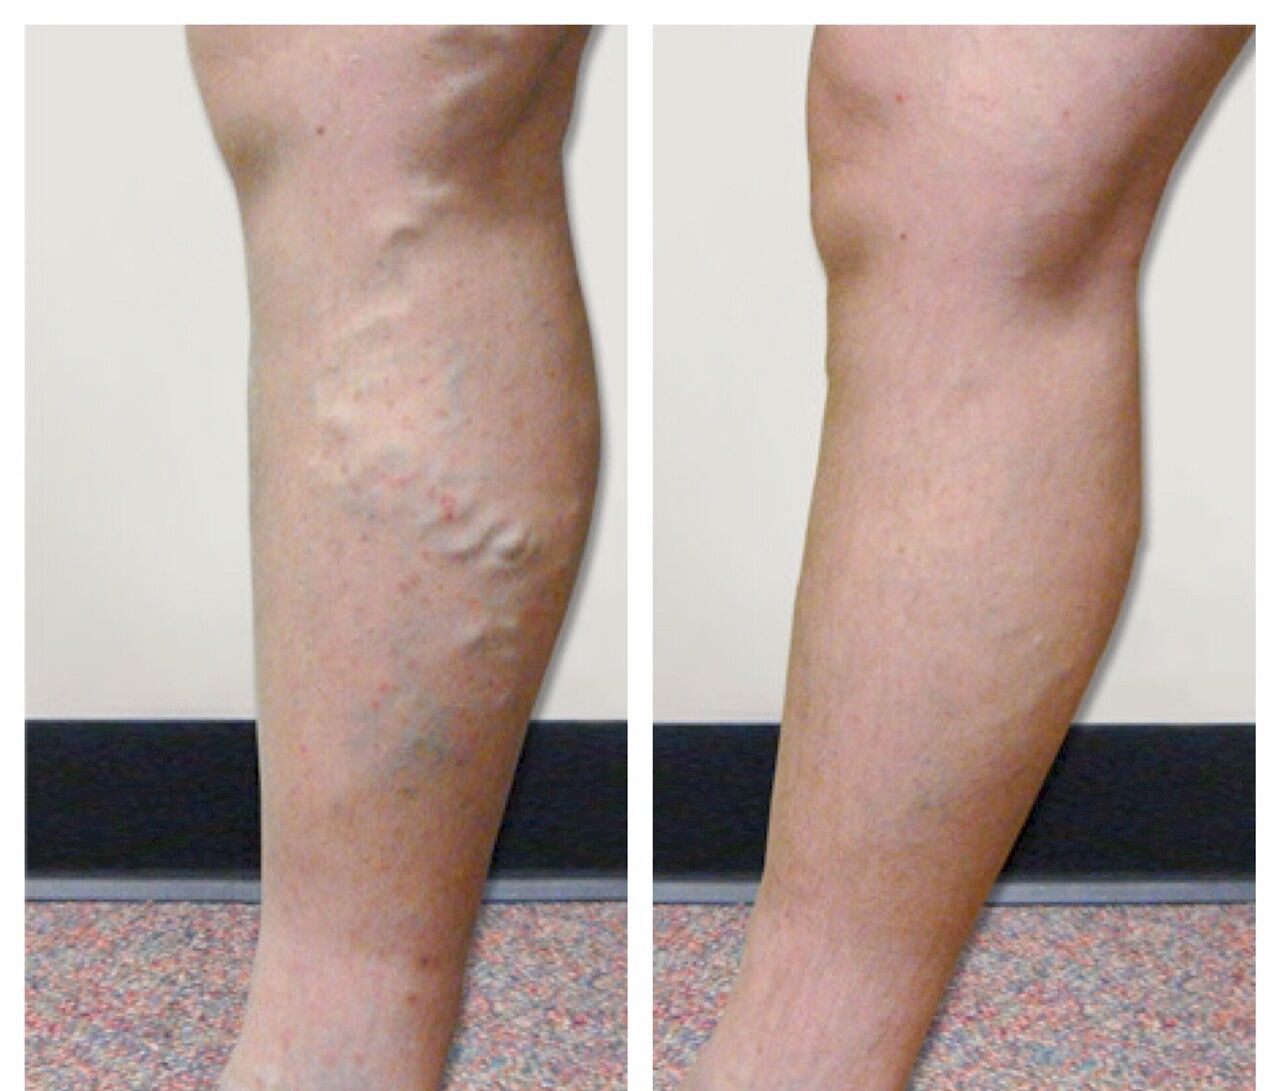 Before & After Photos - Vein Specialists of the Carolinas